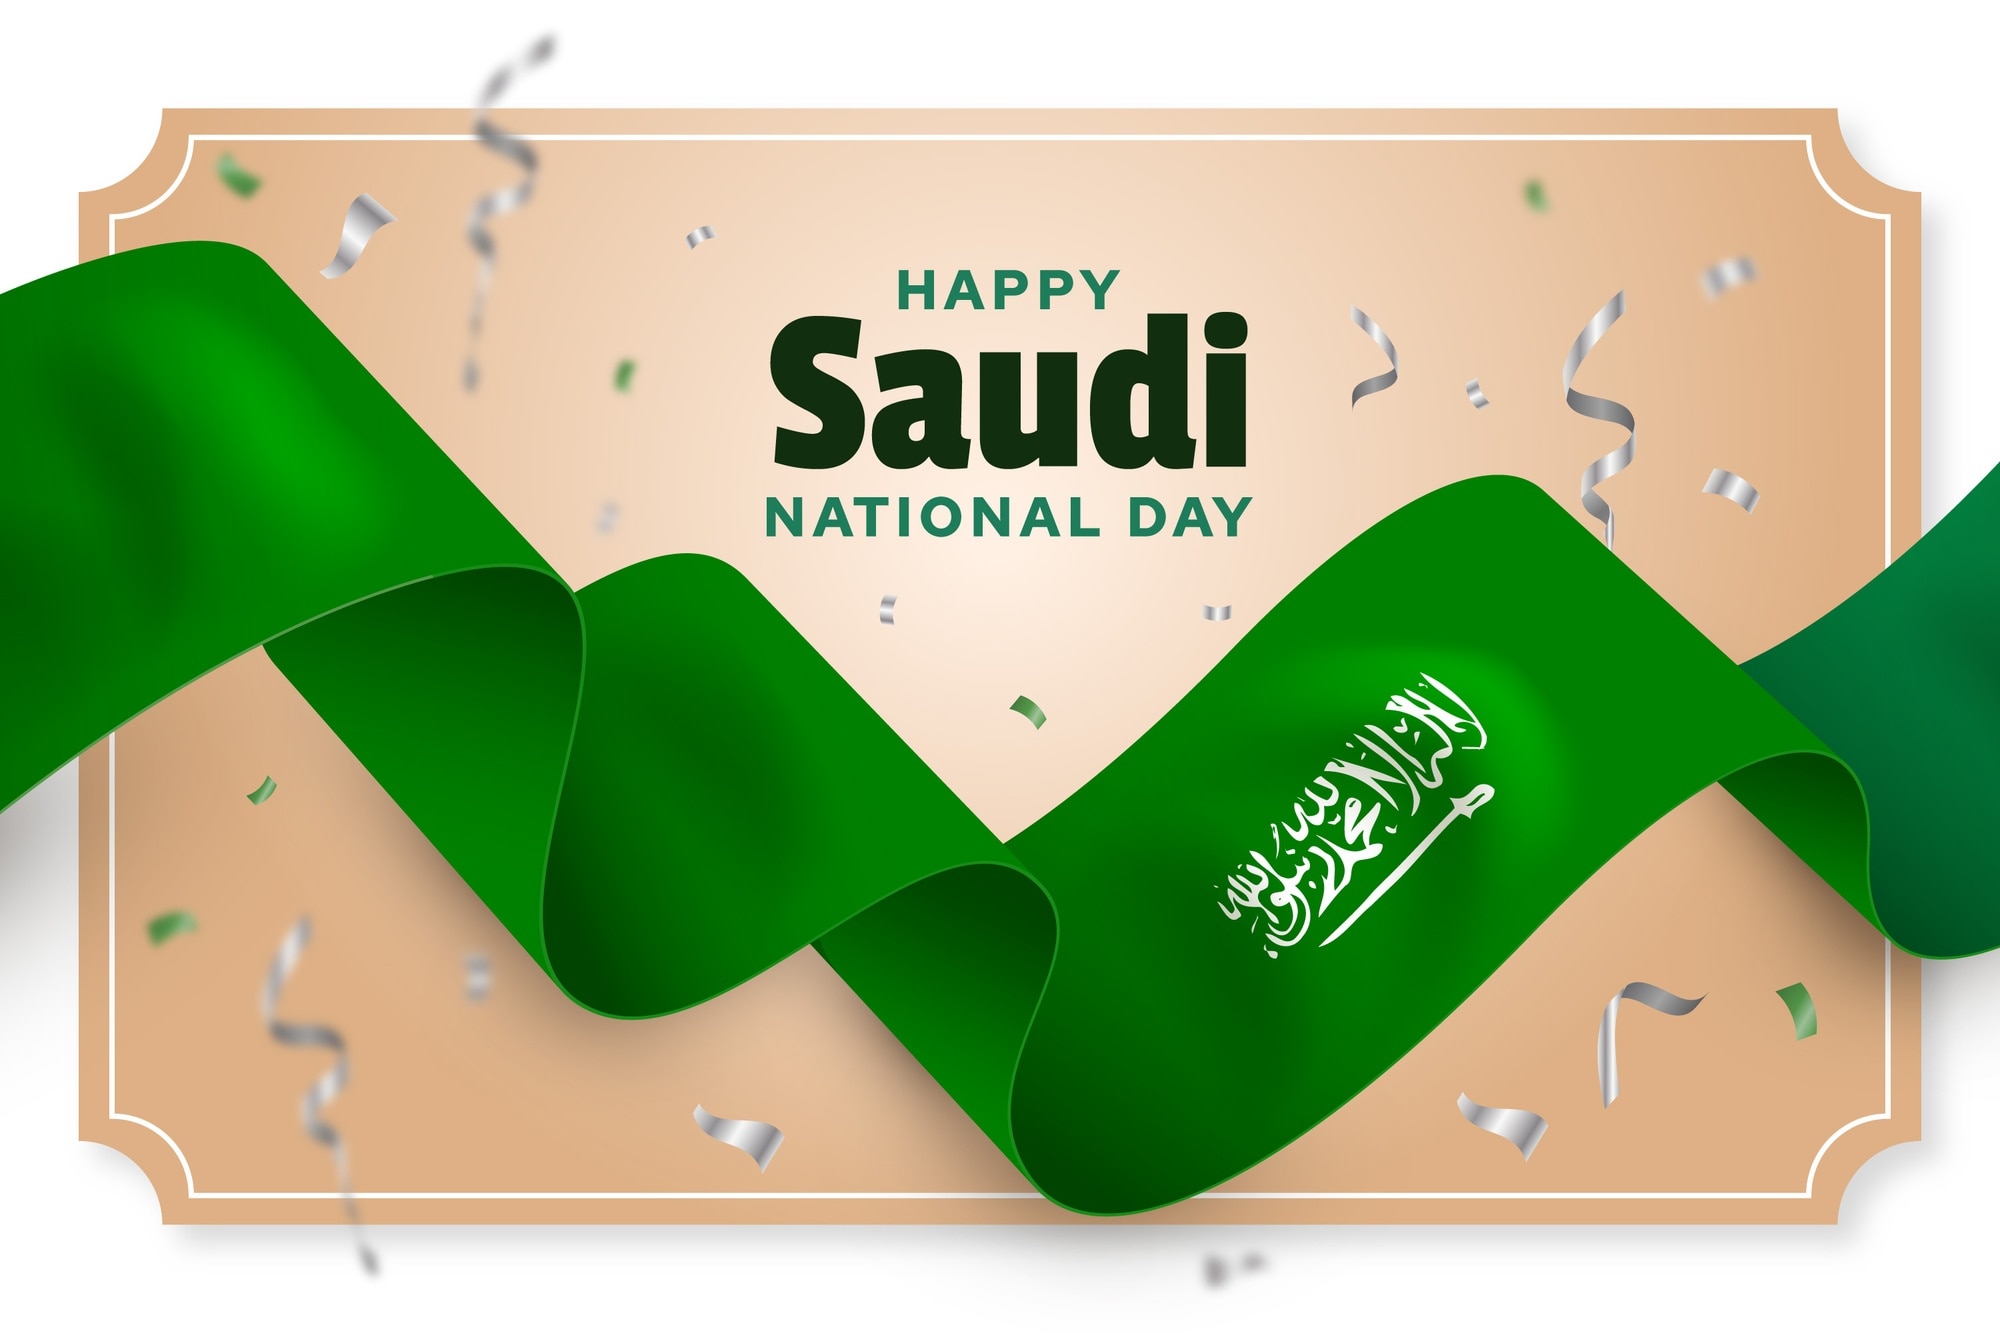 Saudi National Day 2022 Arabic Wishes, Images, Messages, Quotes, HD Wallpaper, Greetings, and WhatsApp Status Video To Download